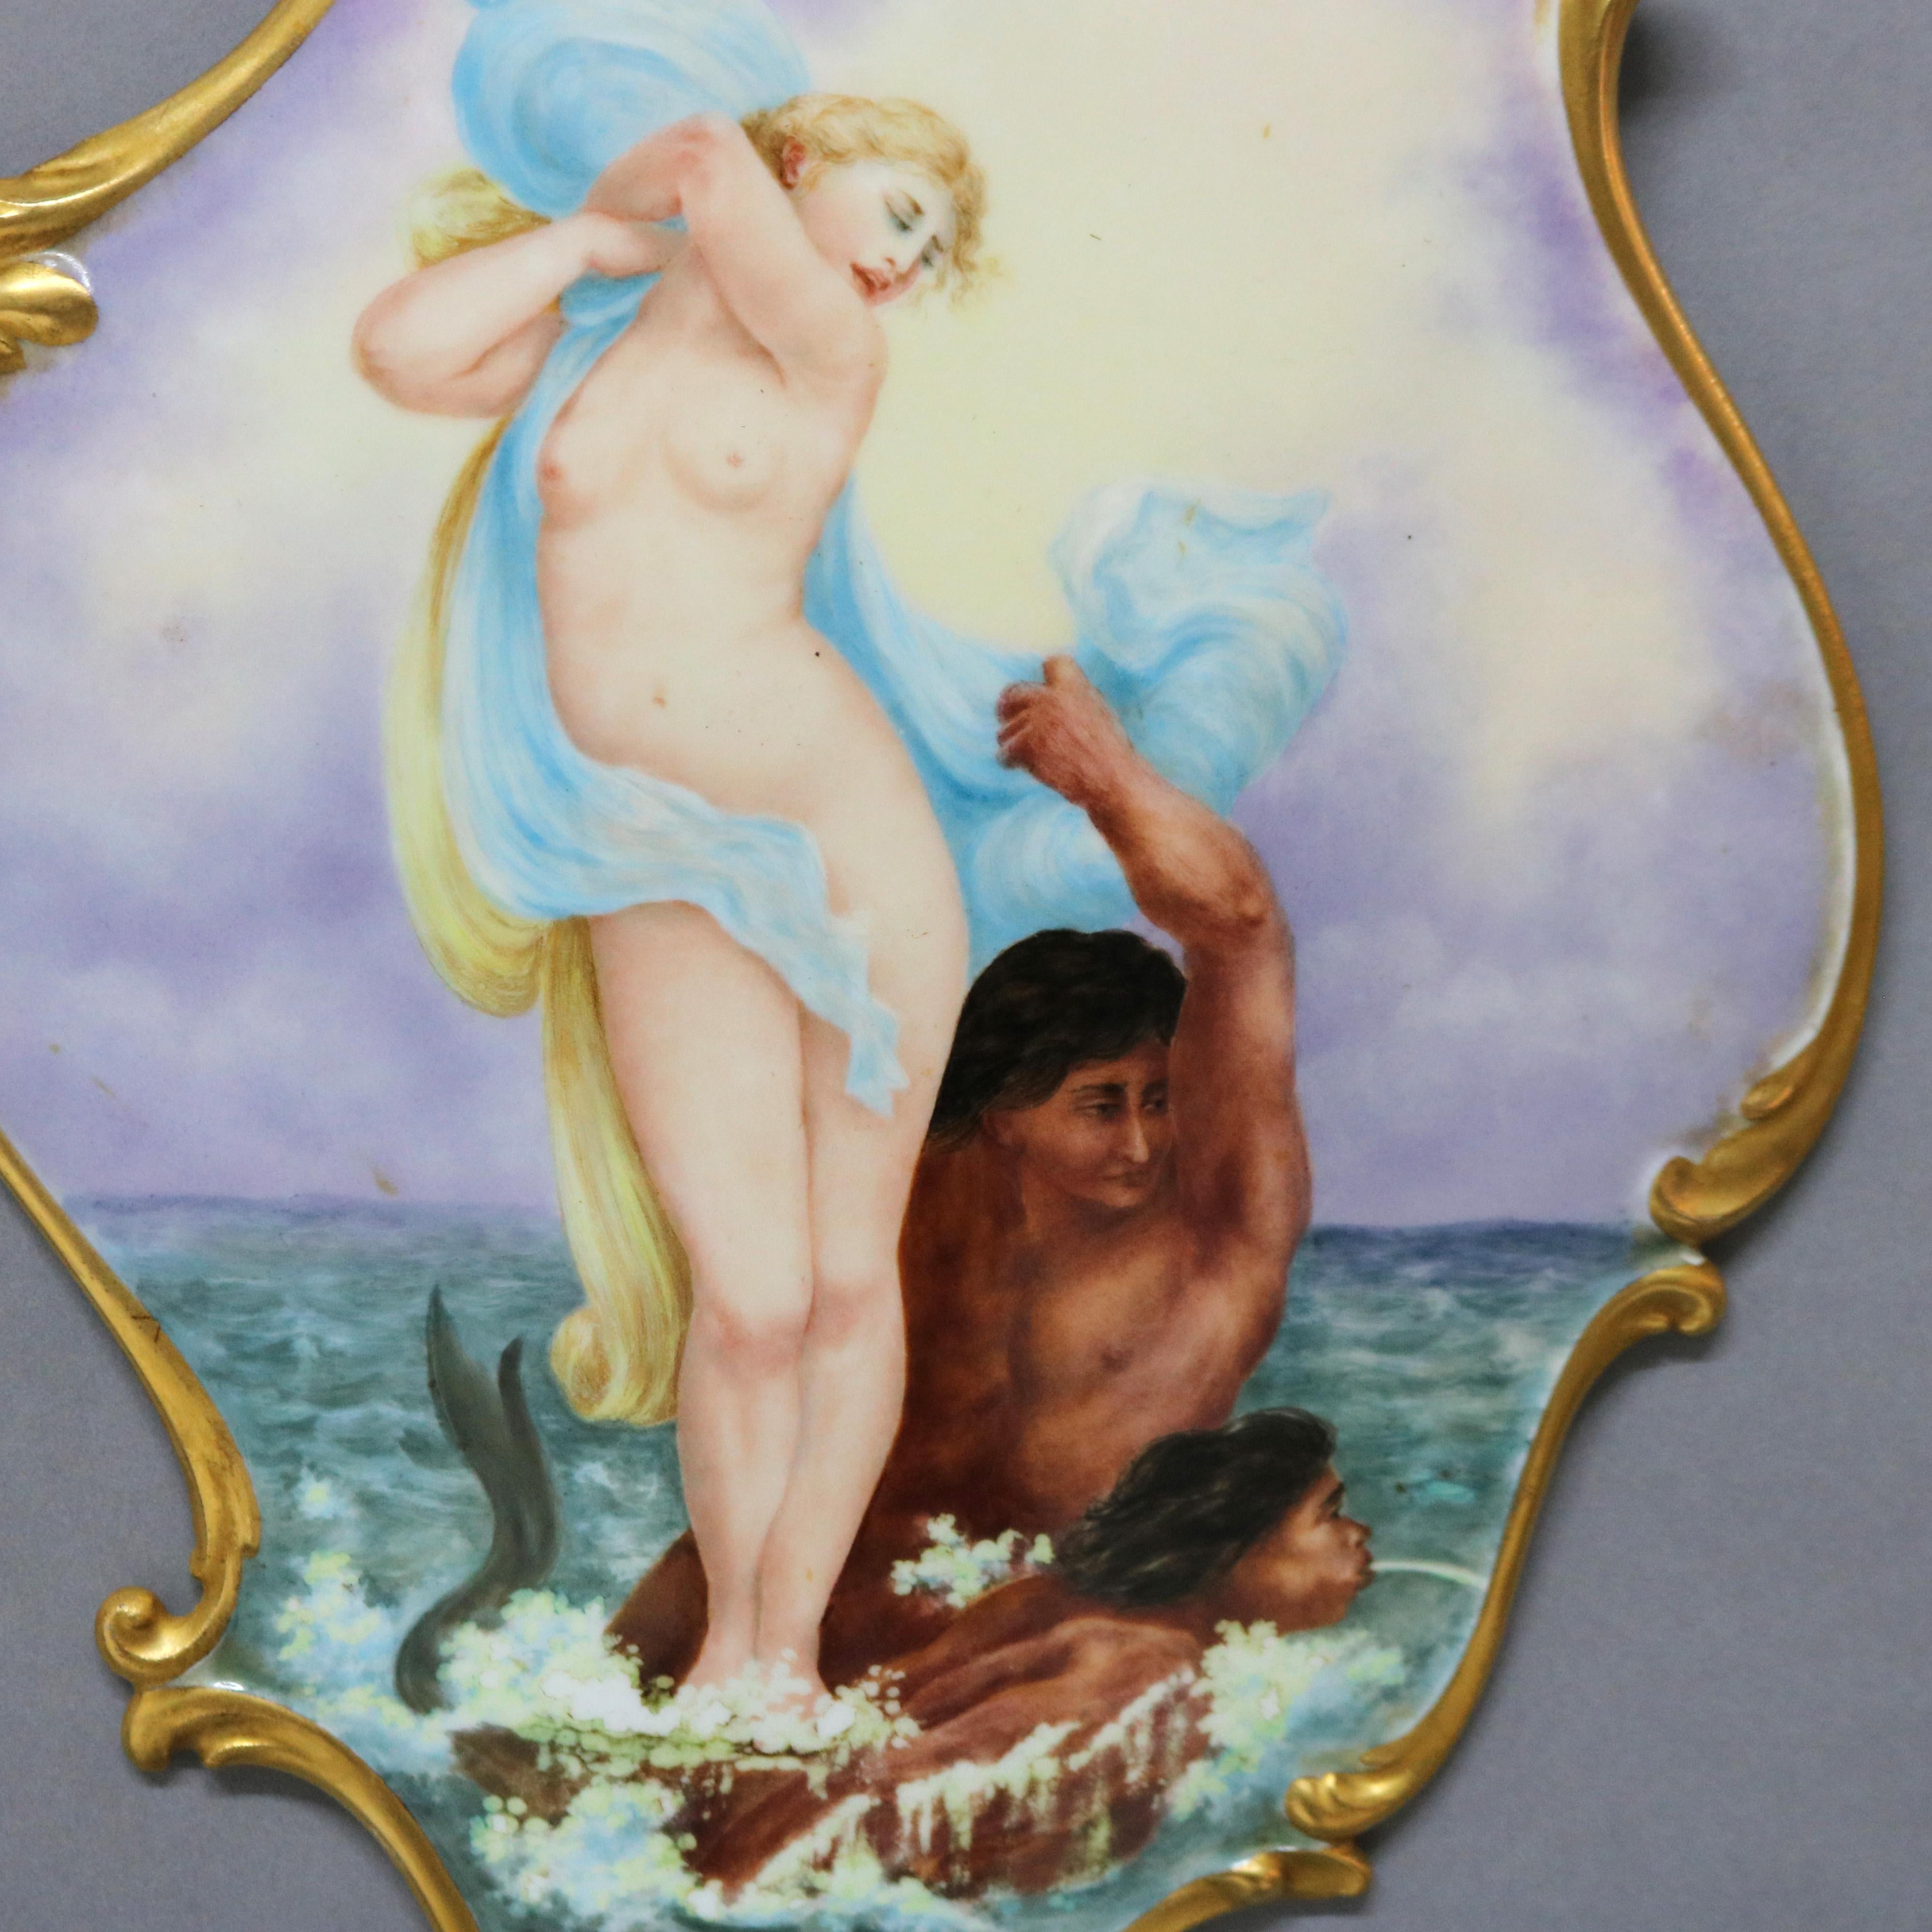 French Antique Limoges Porcelain Hand Painted Plaque, Nymph & Mermaids by E. Meyer 1898